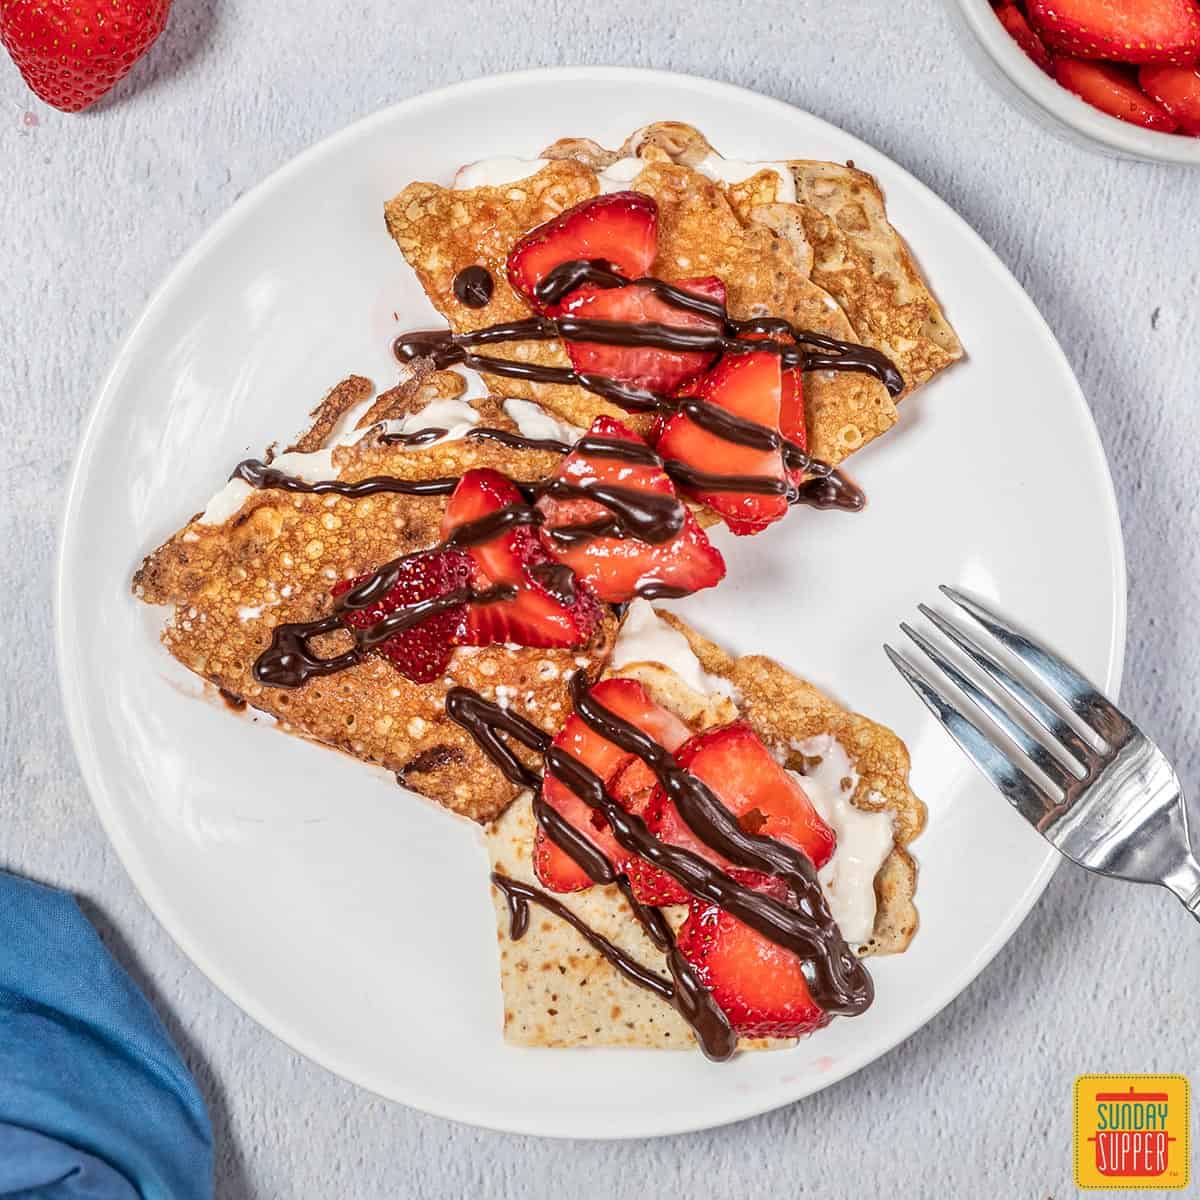 Three strawberry crepes on a plate with chocolate sauce